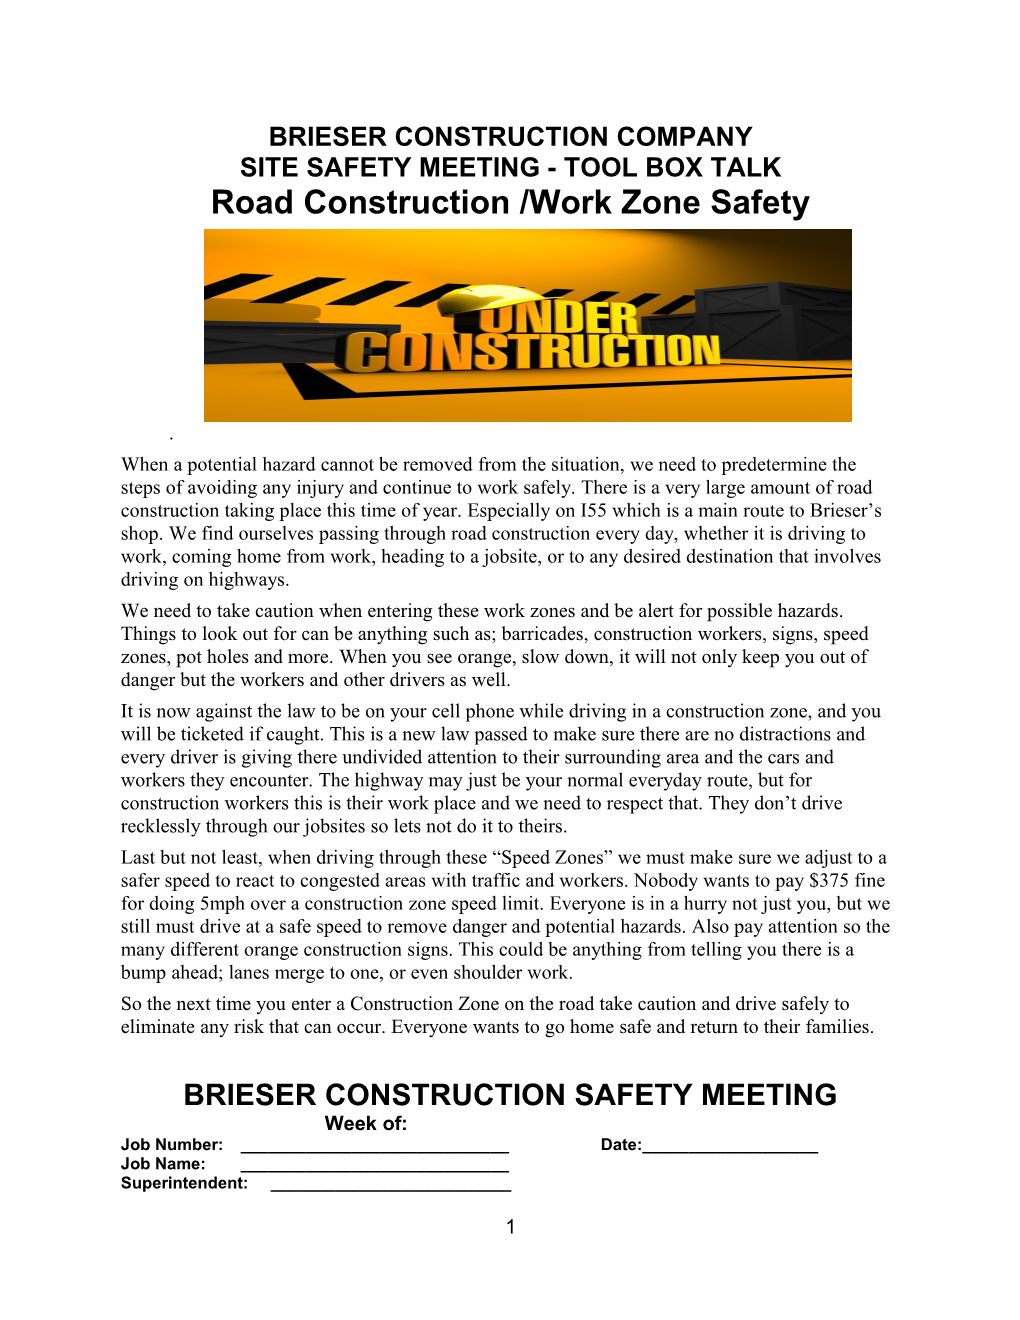 Site Safety Meeting - Tool Box Talk